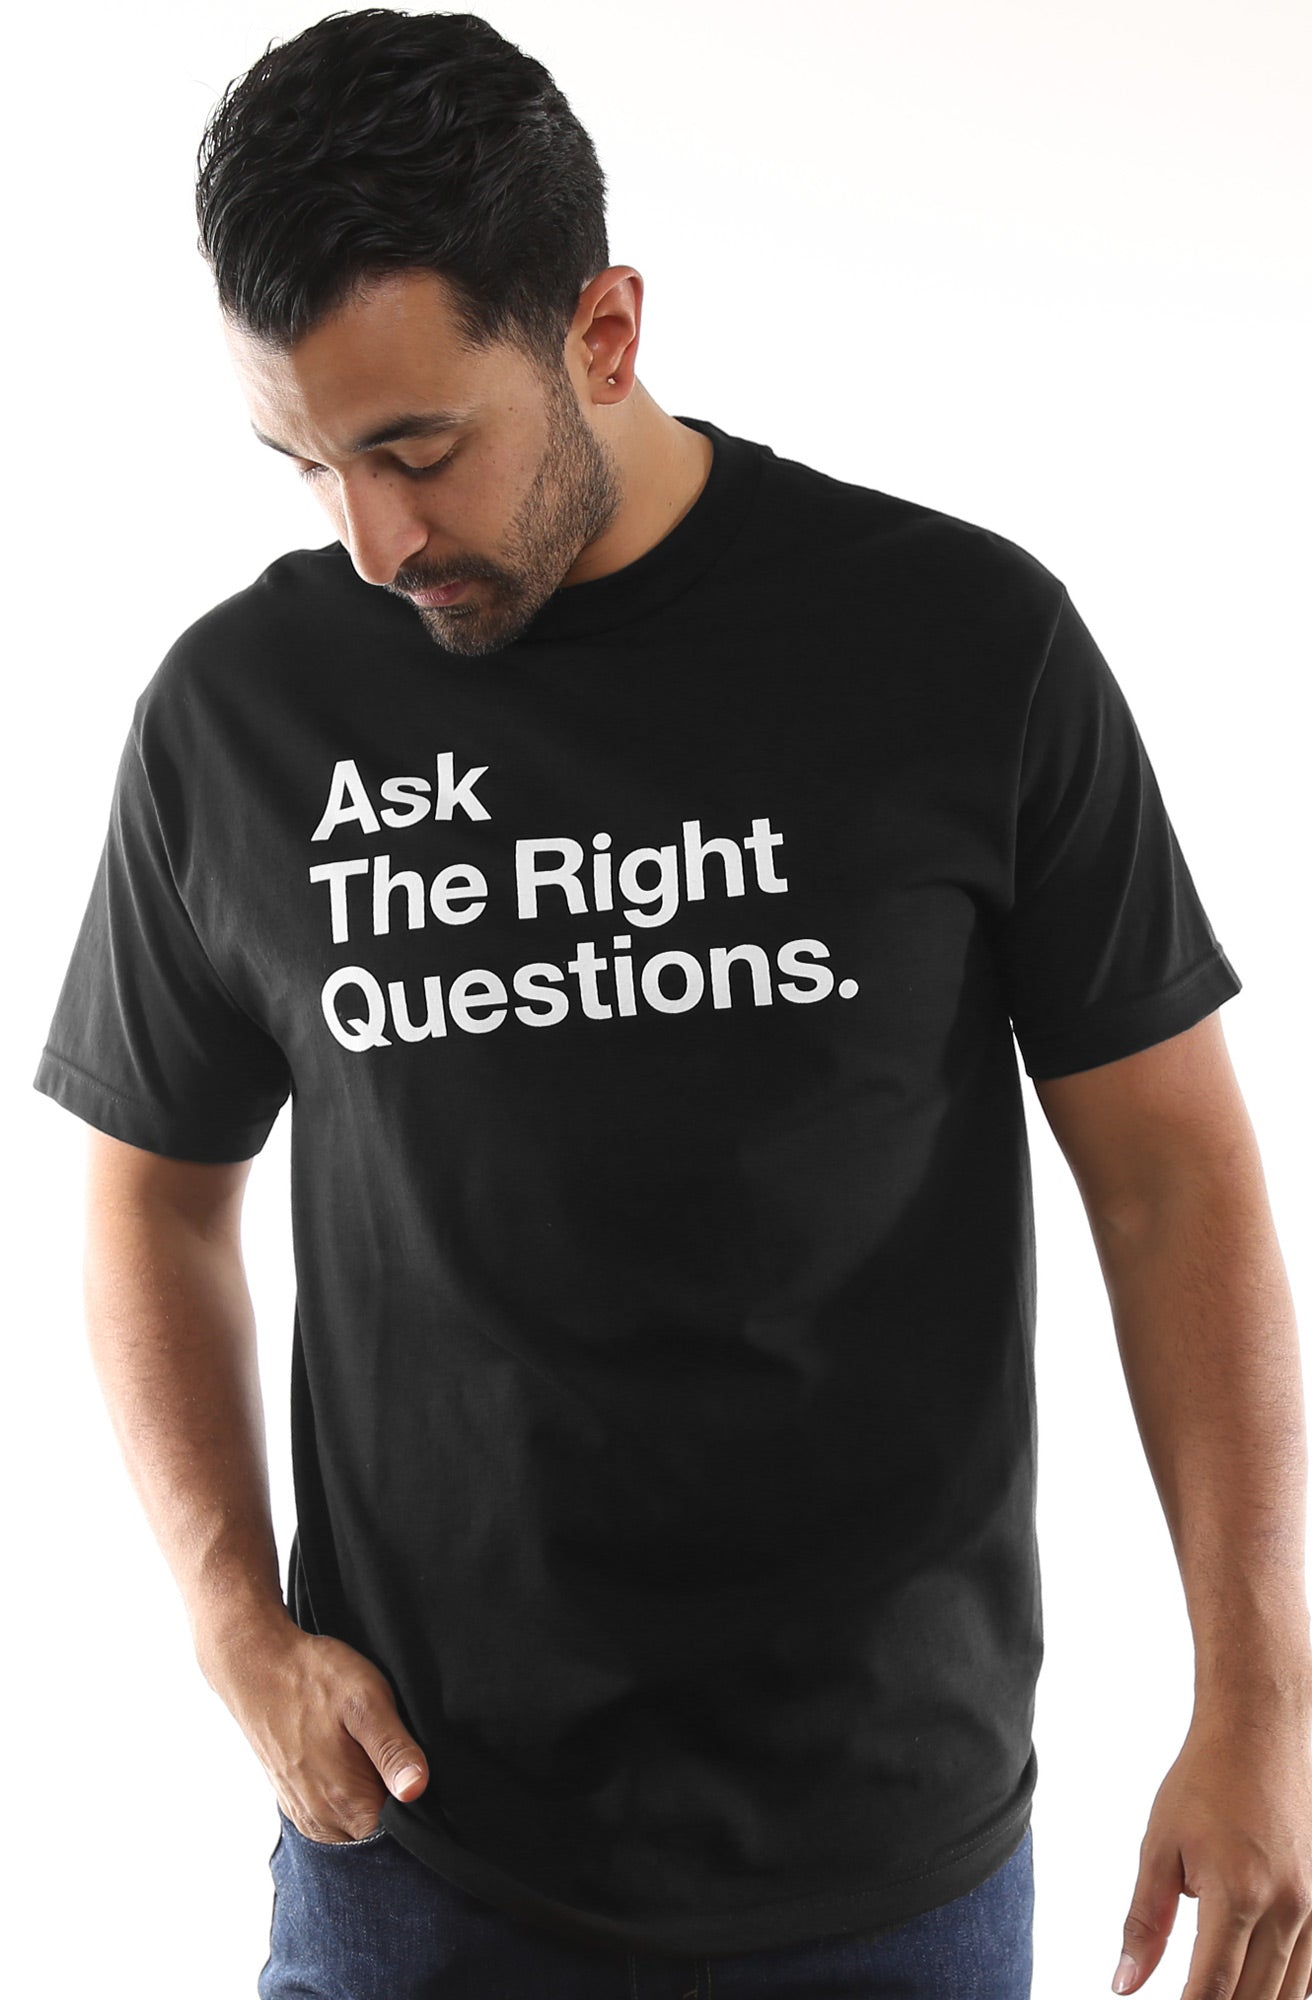 Ask The Right Questions (Men's Black Tee)